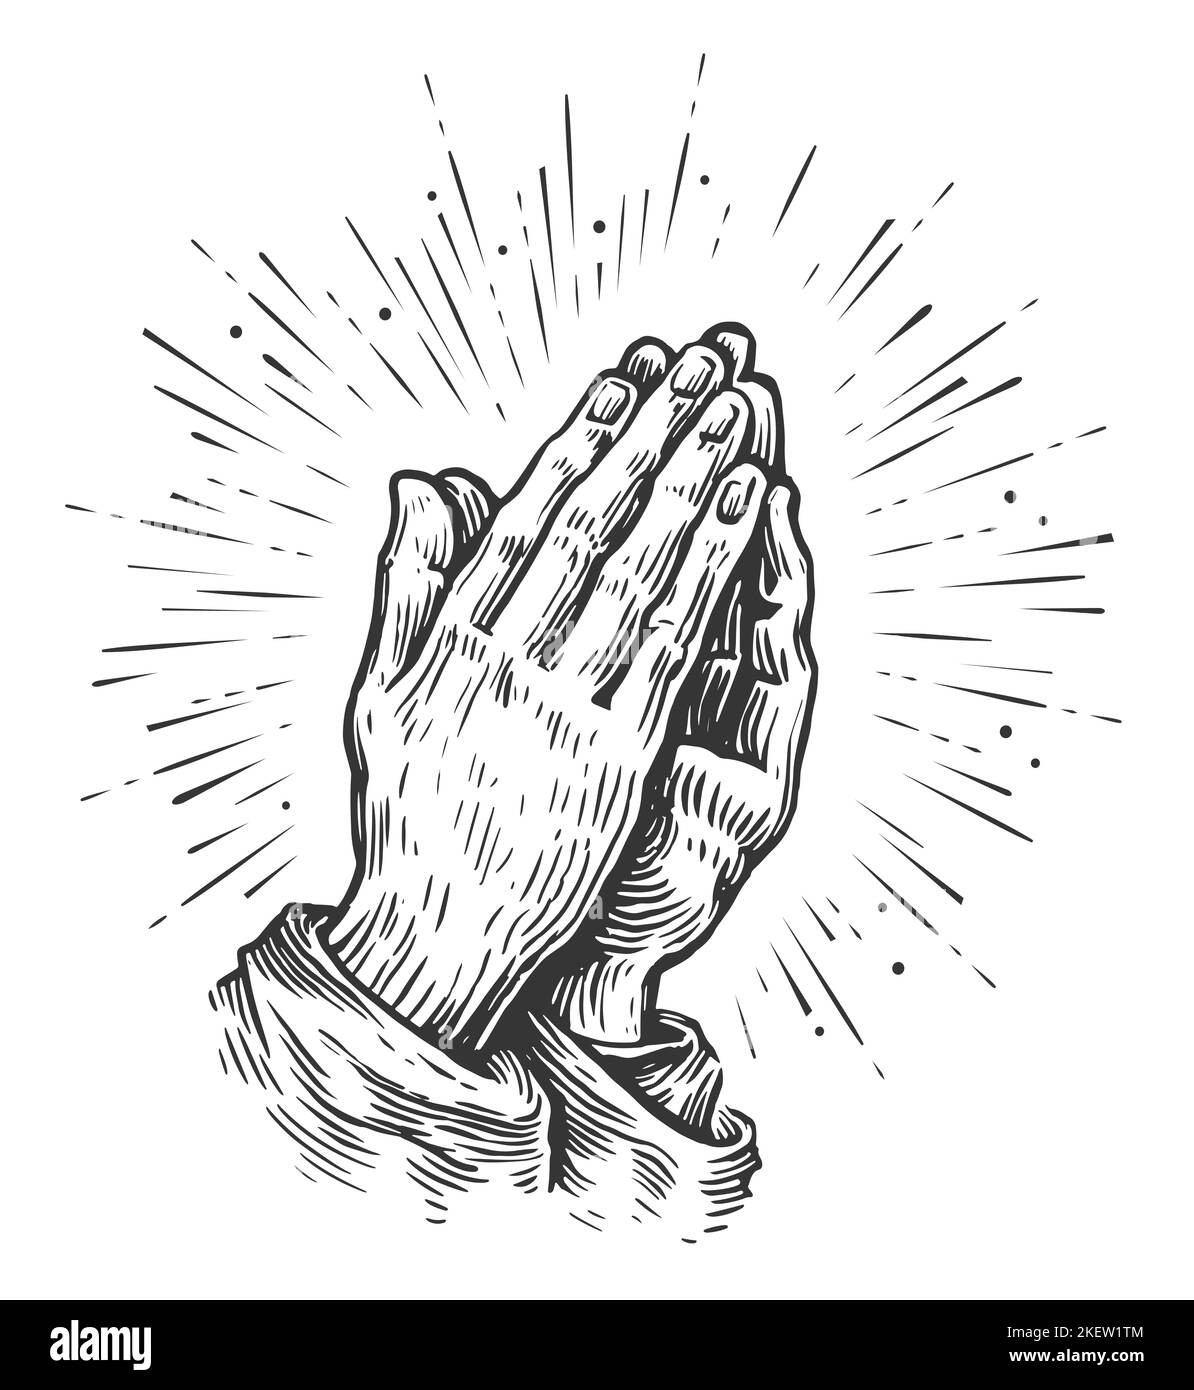 Praying Hands. Human hands folded in prayer in vintage engraving style. Pray symbol Stock Photo